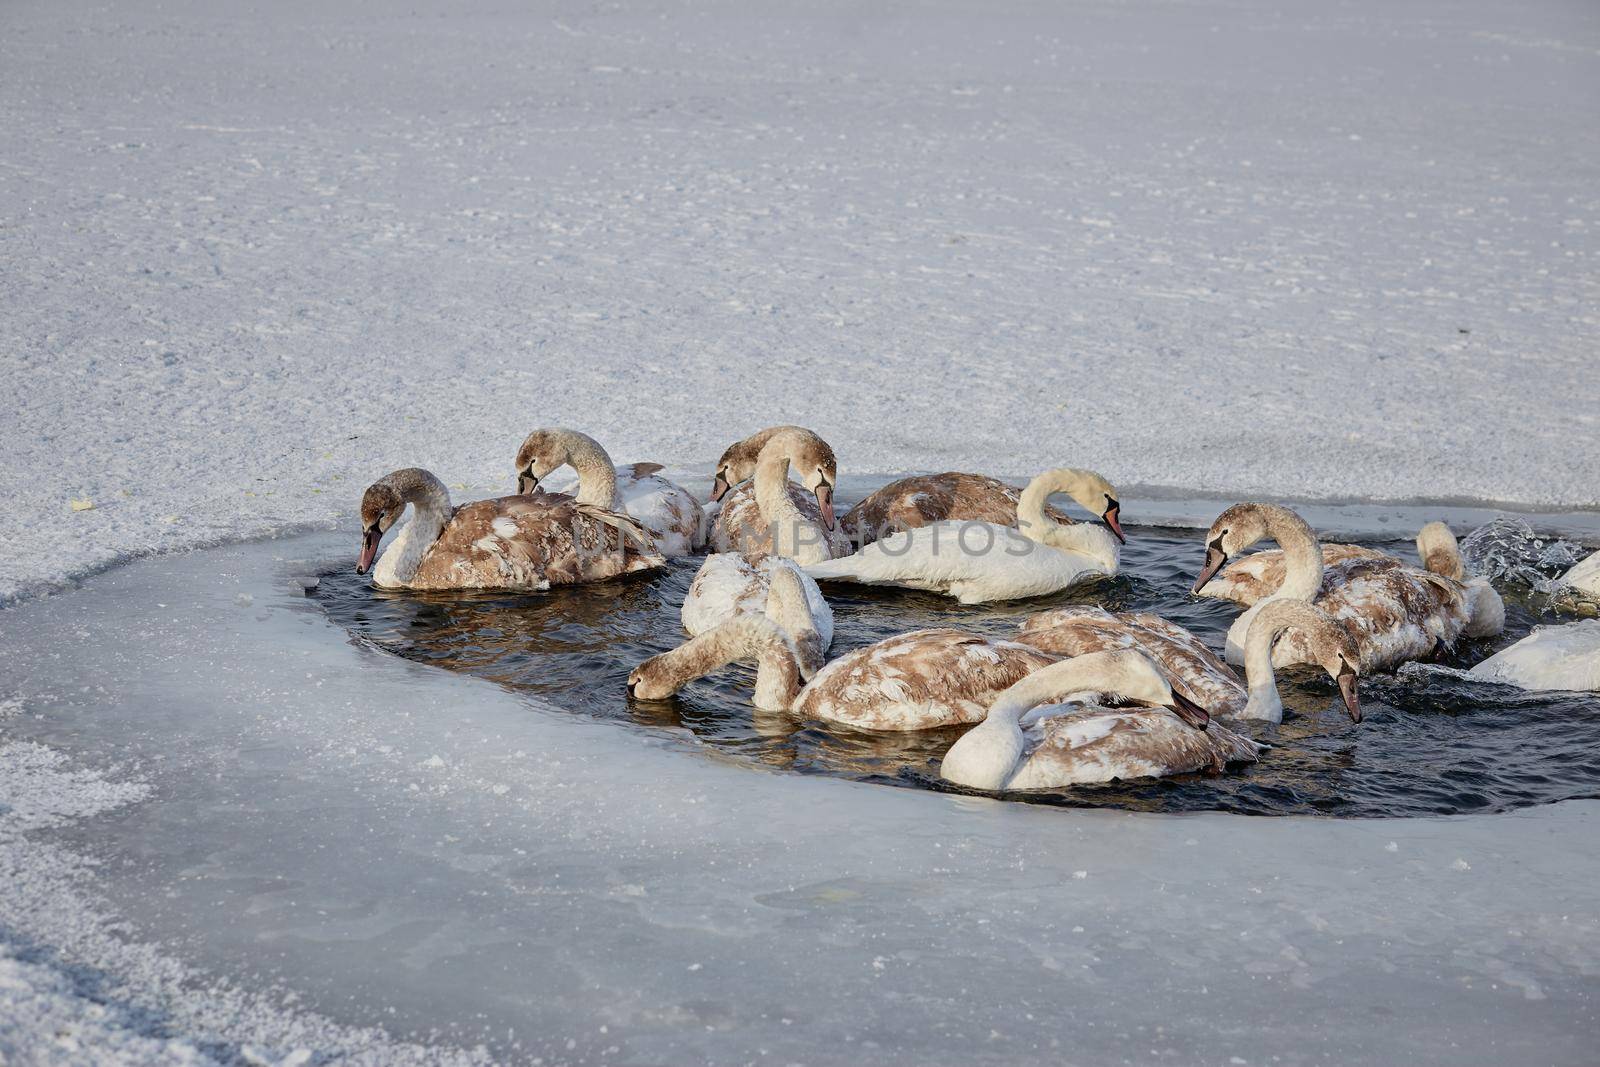 Freezing young swans in the ice of an icy lake by AliaksandrFilimonau